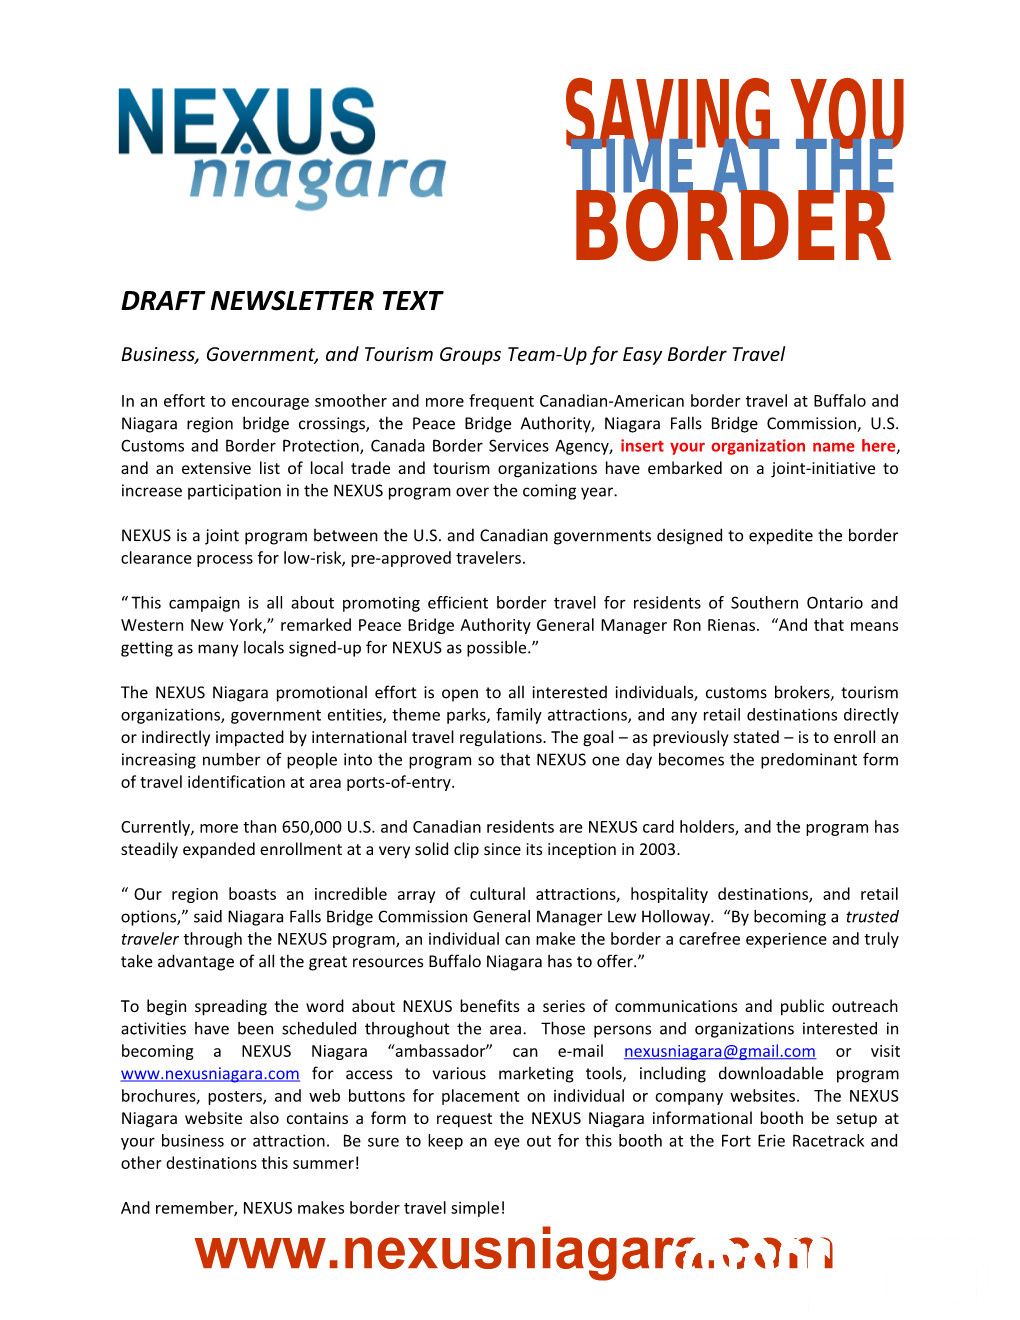 Business, Government, and Tourism Groups Team-Up for Easy Border Travel